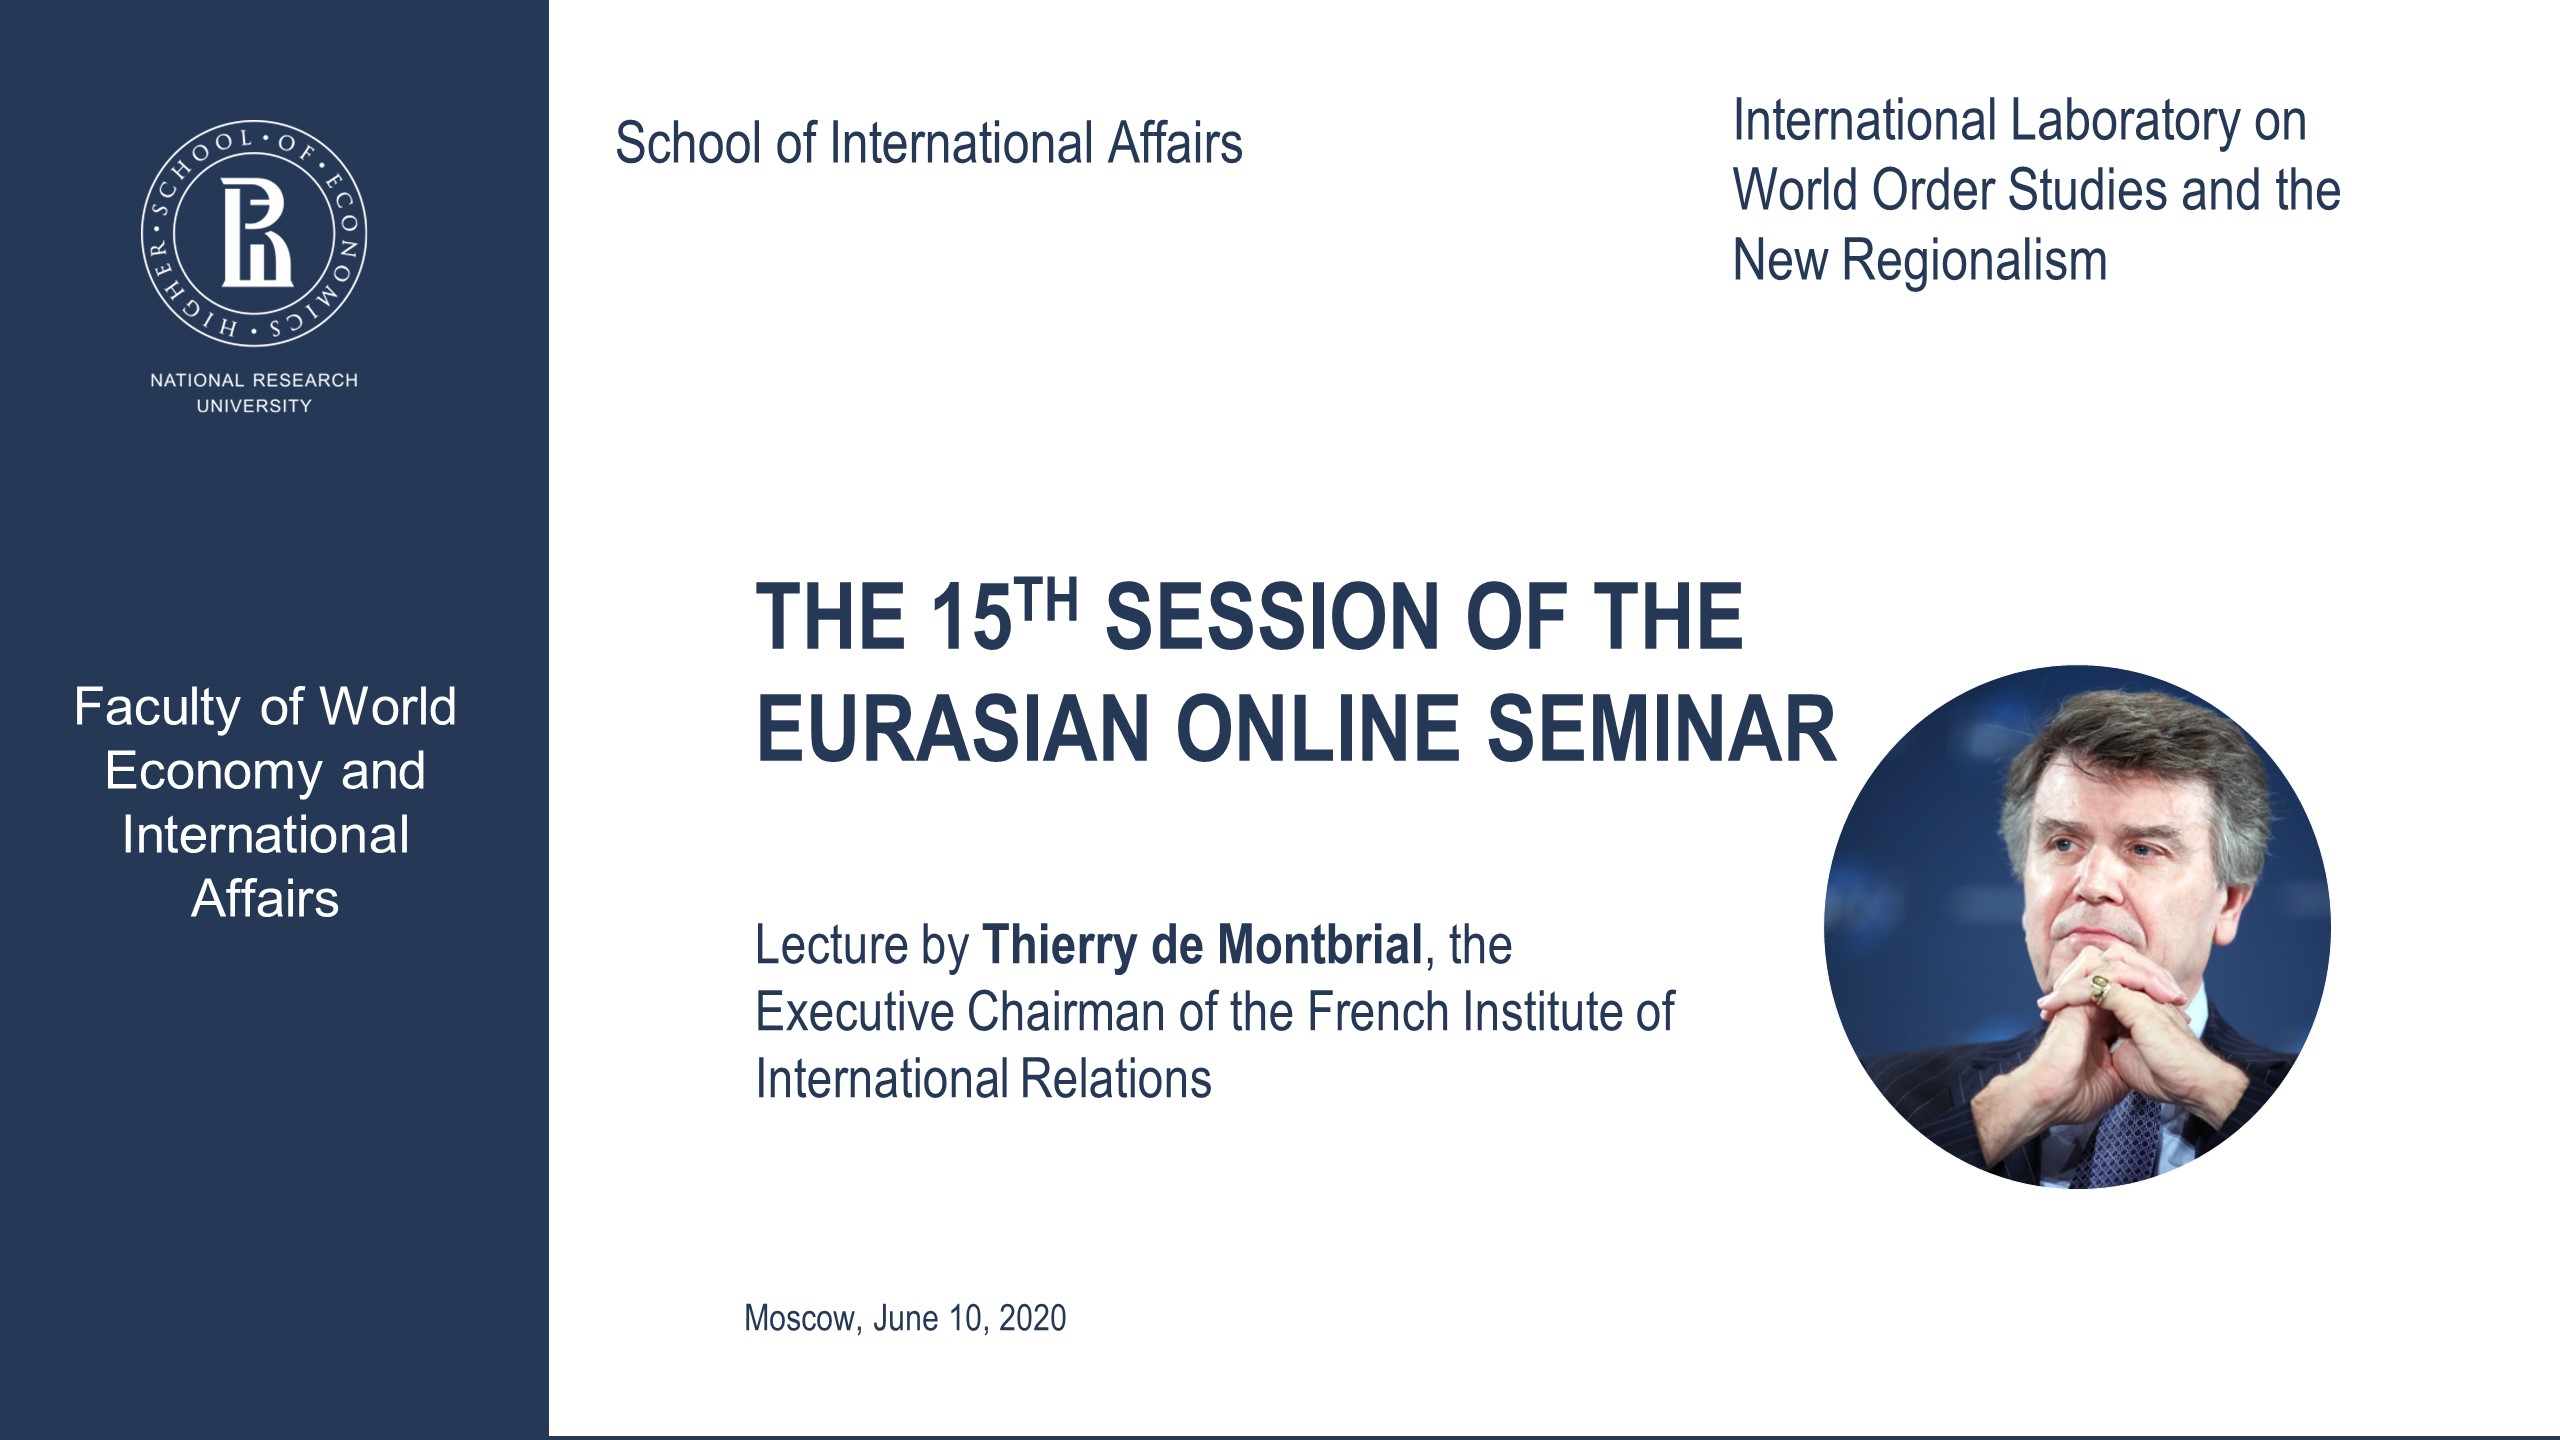 The 15th Session of Eurasian Online Seminar with Thierry de Montbrial